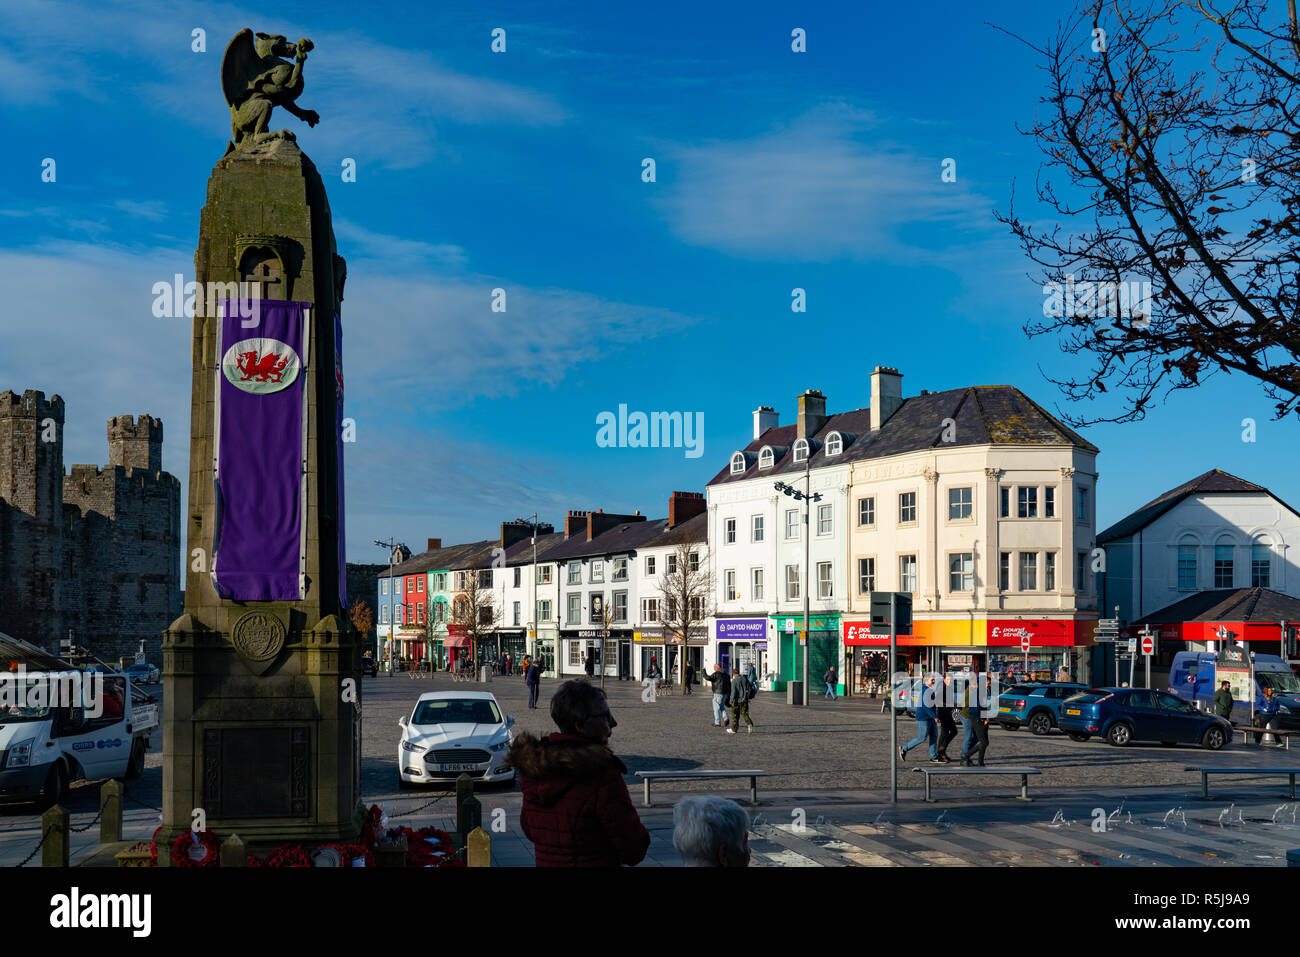 The Cenotaph on the square (Y Maes), Caernarfon, Gwynedd, North Wales. Image taken in November 2018. Stock Photo